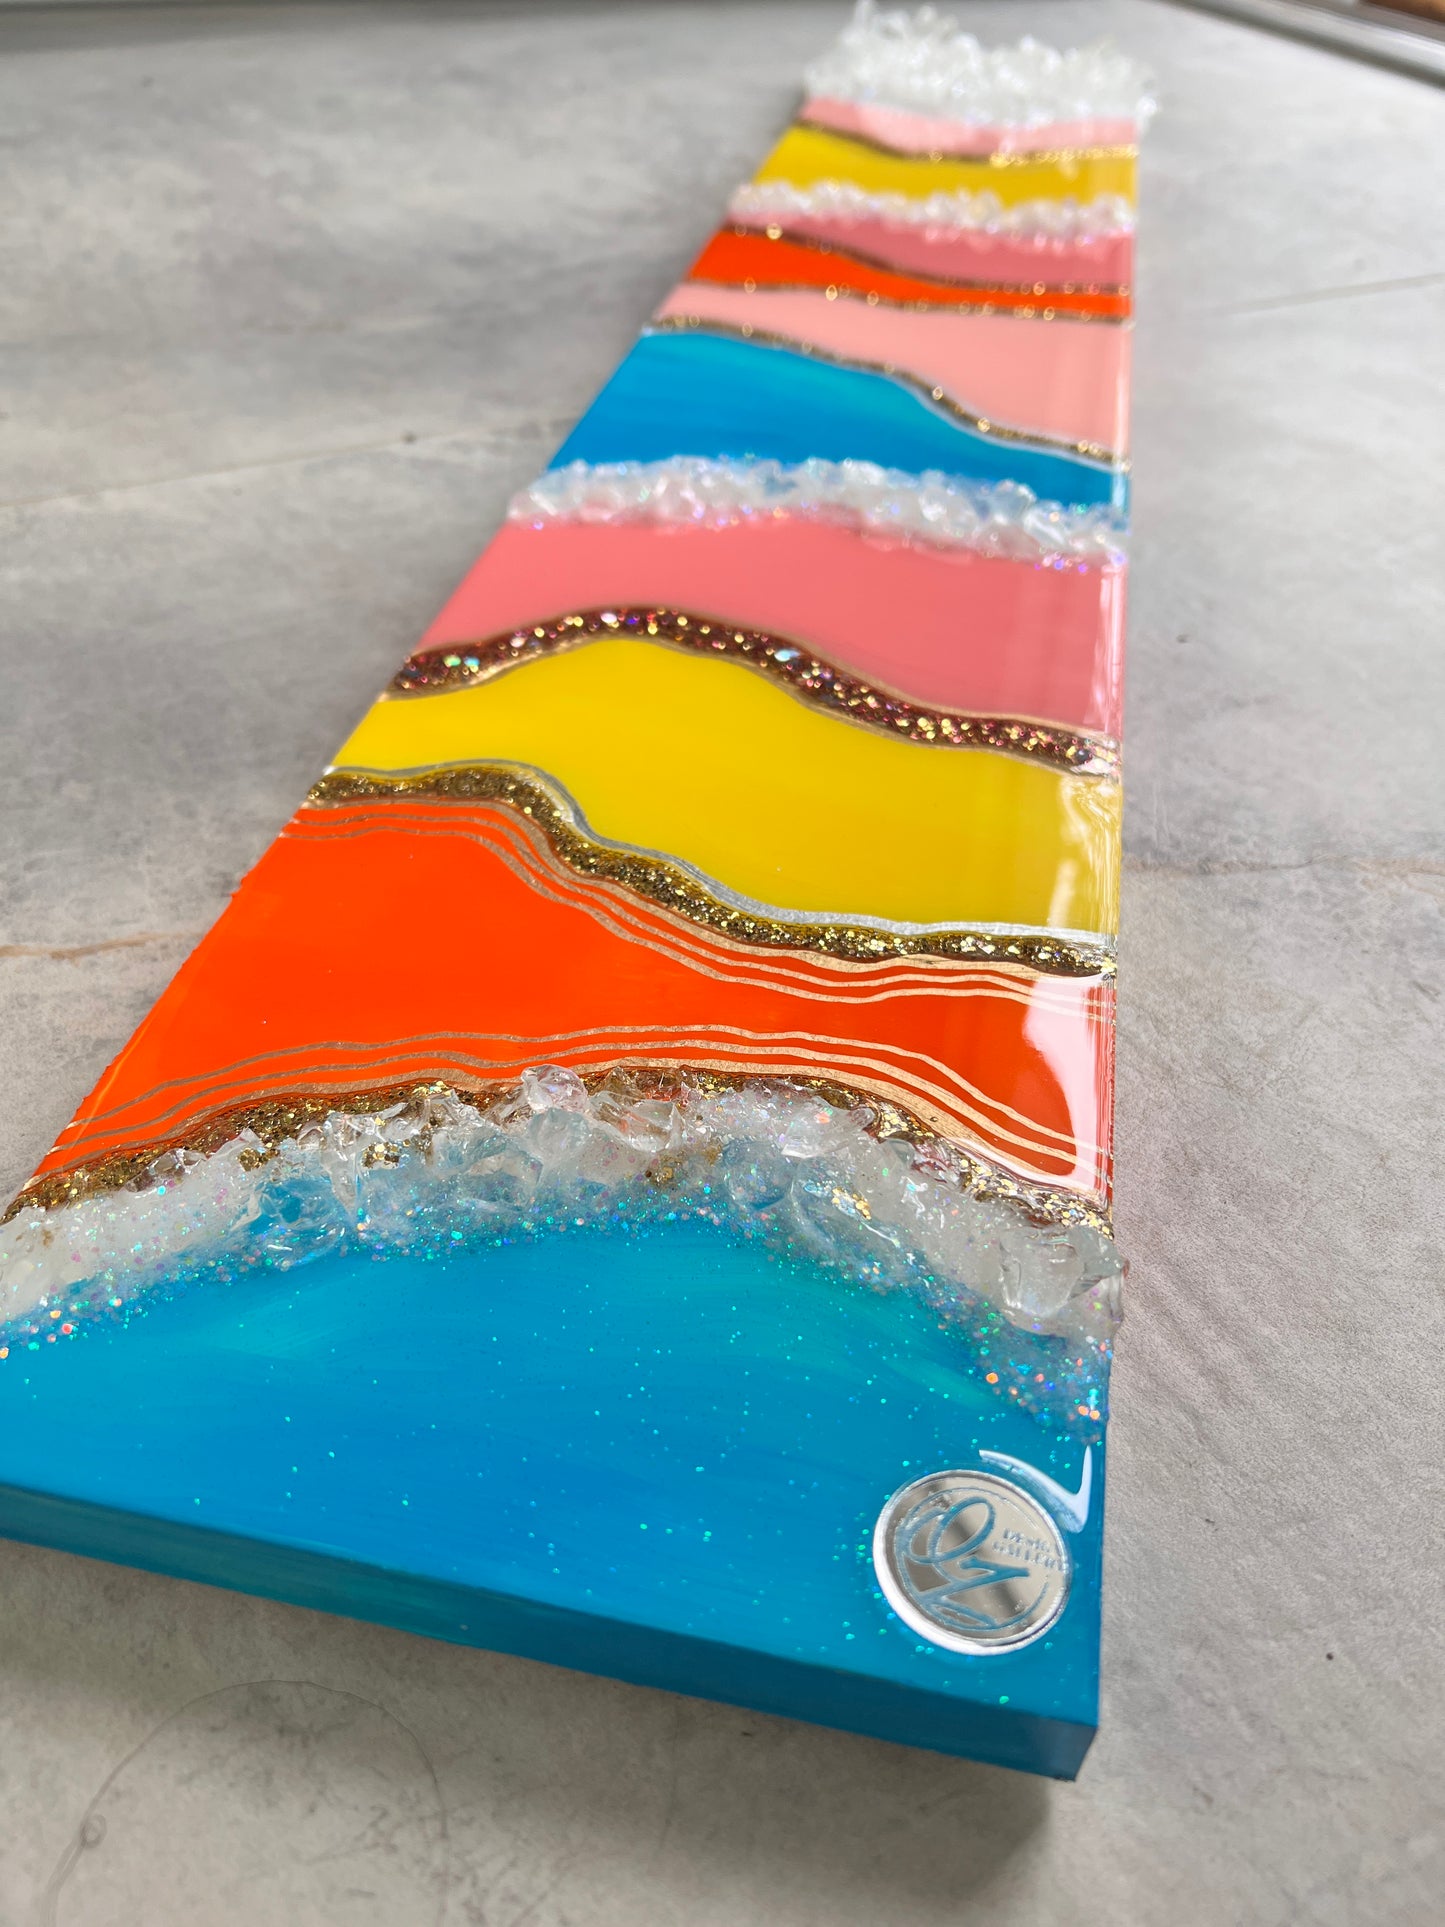 NEW! Colorful layered Resin and Glass Artwork